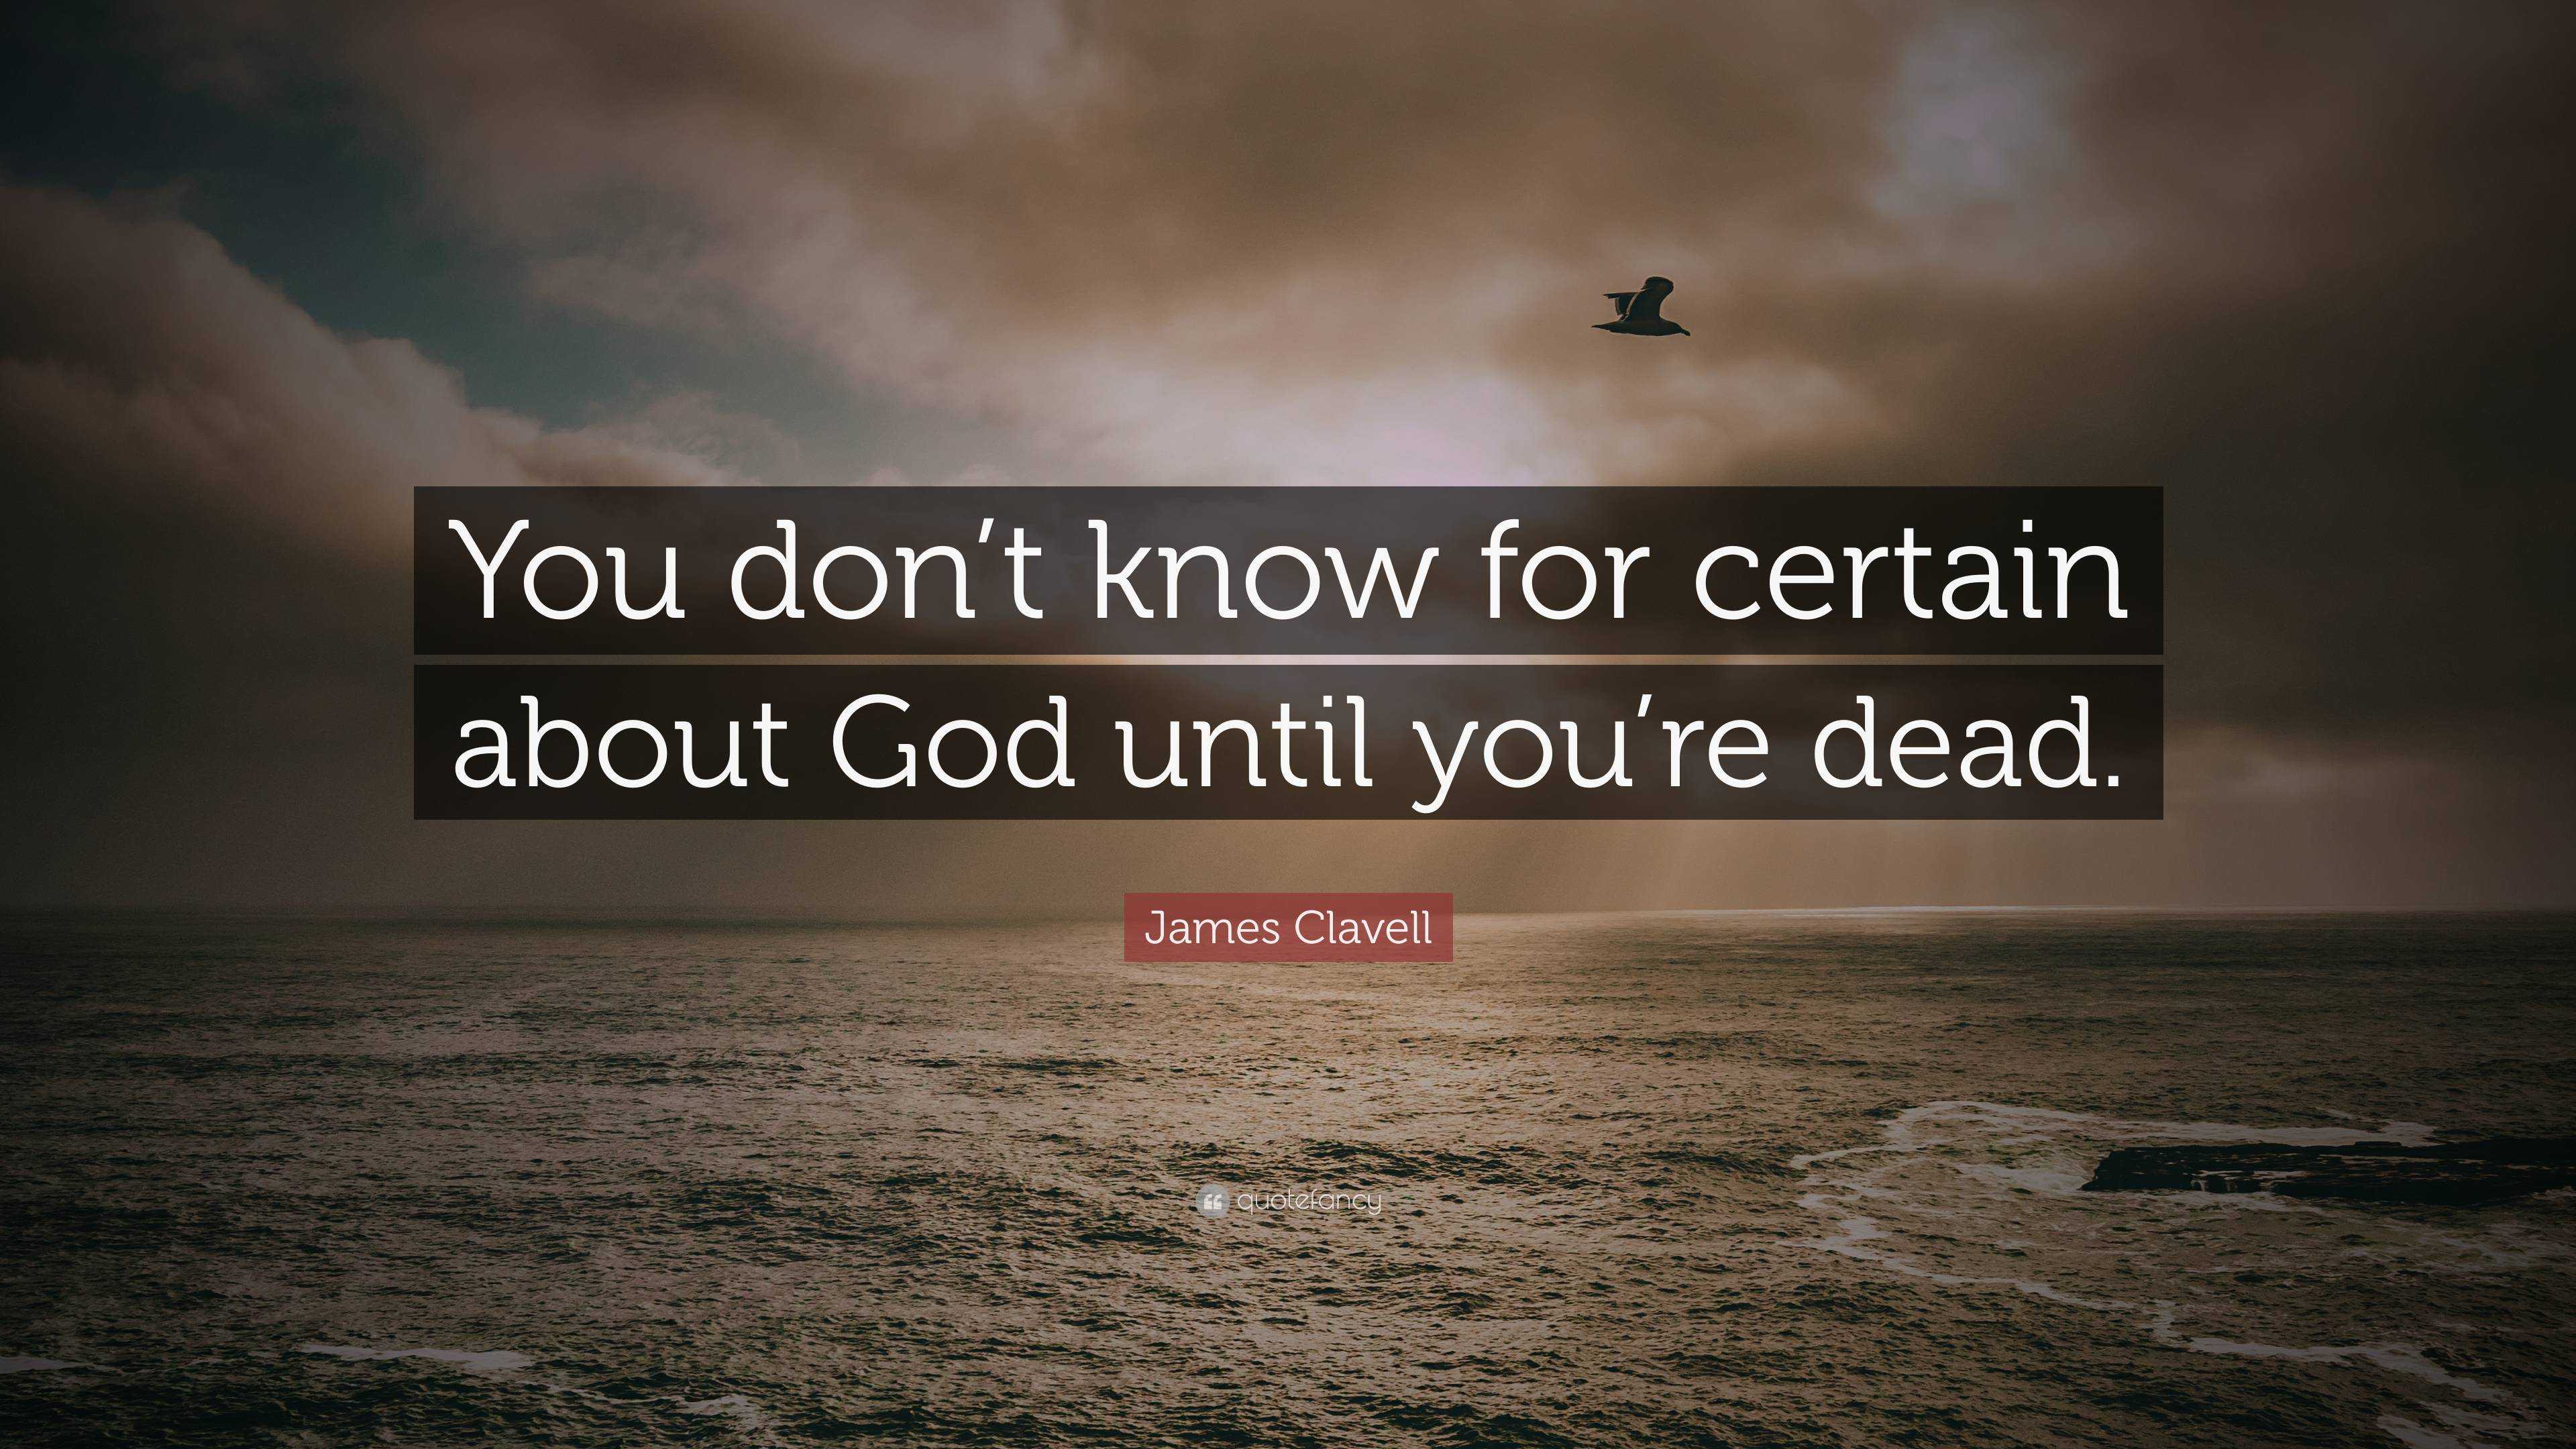 James Clavell Quote You Don T Know For Certain About God Until You Re Dead 2 Wallpapers Quotefancy